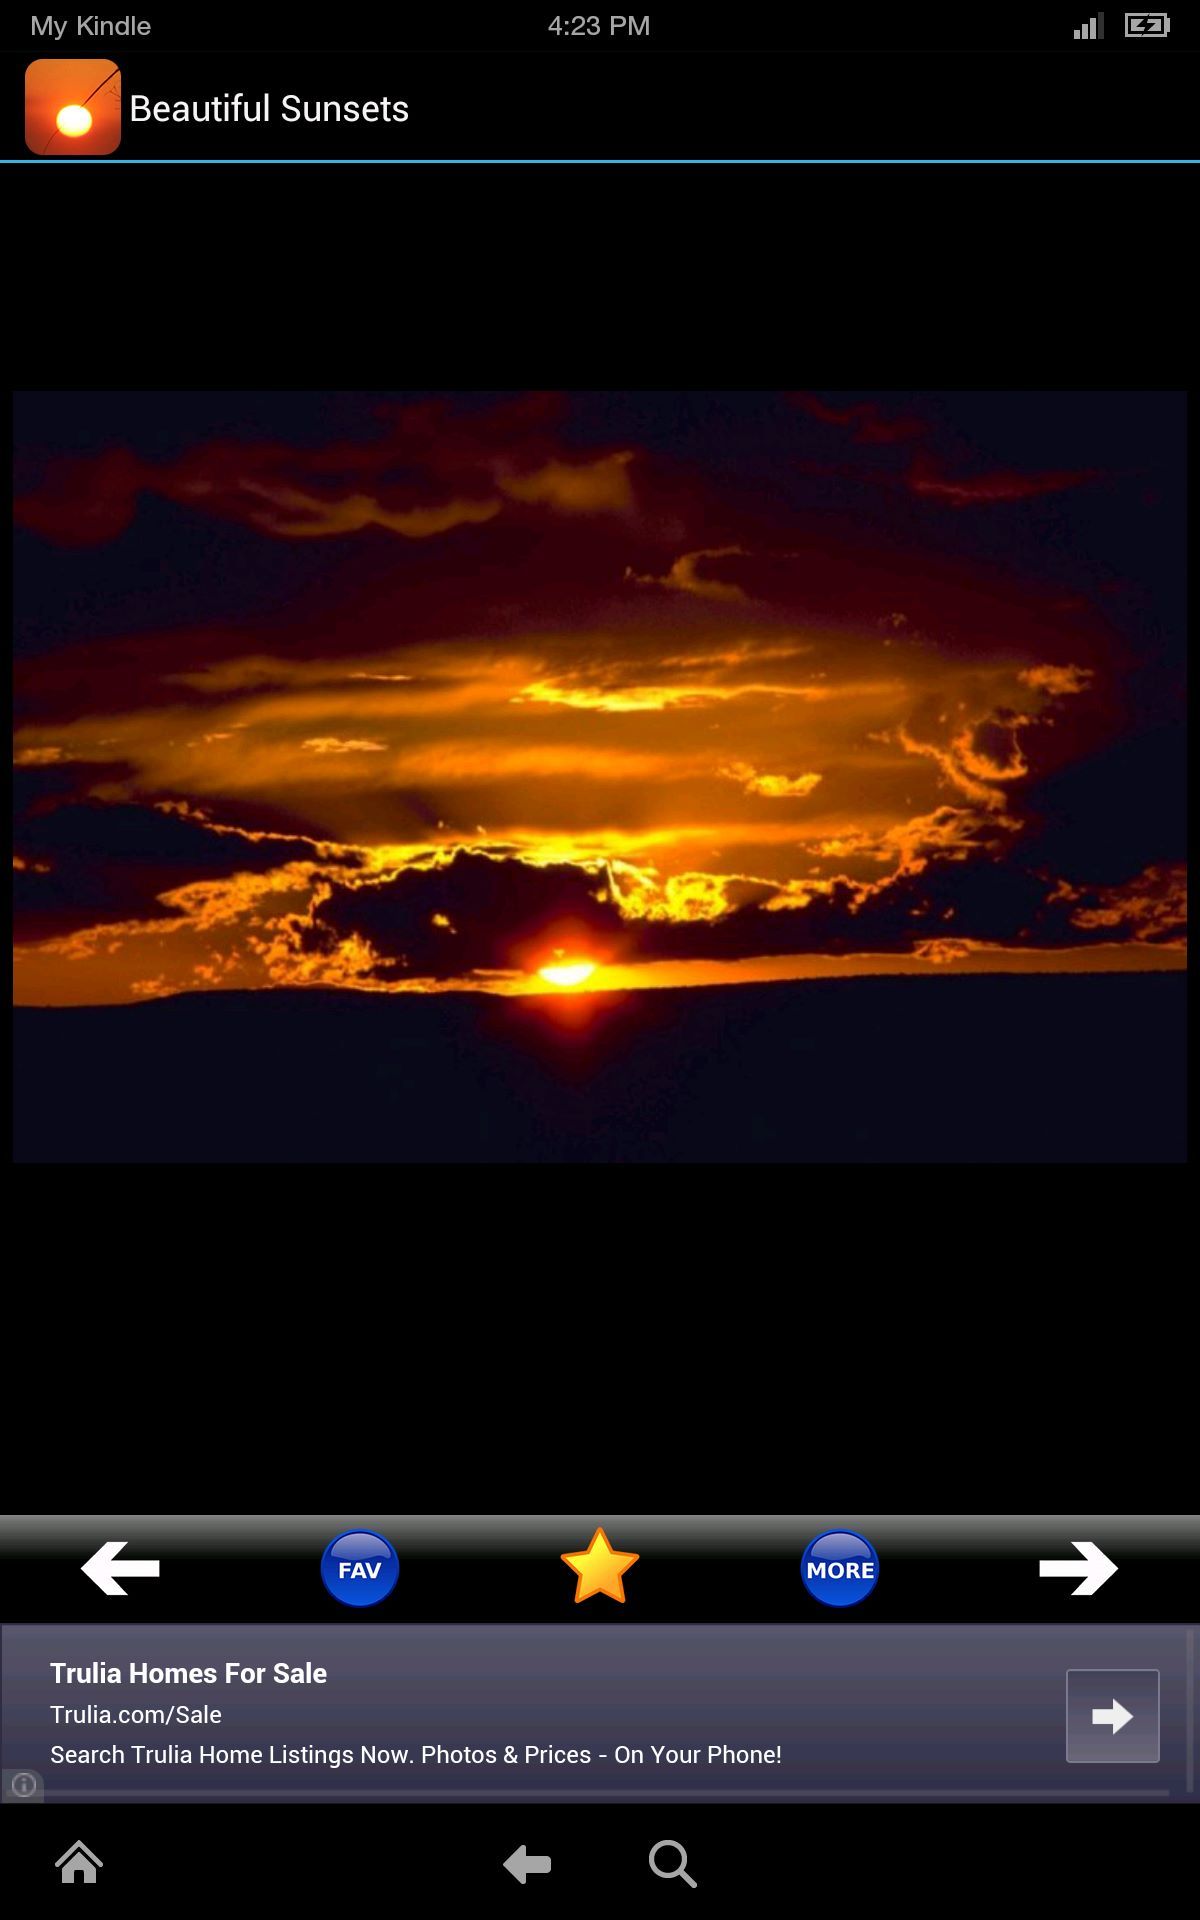 Beautiful Sunsets!!! Relax with Amazing Romantic Sunset Pictures of National Parks, Waterfalls, Flowers, Garden Pics, Sunset & Sunrise Riders Landscape, and Plants! Fun Free Wallpaper Design App for Kids & Adults!